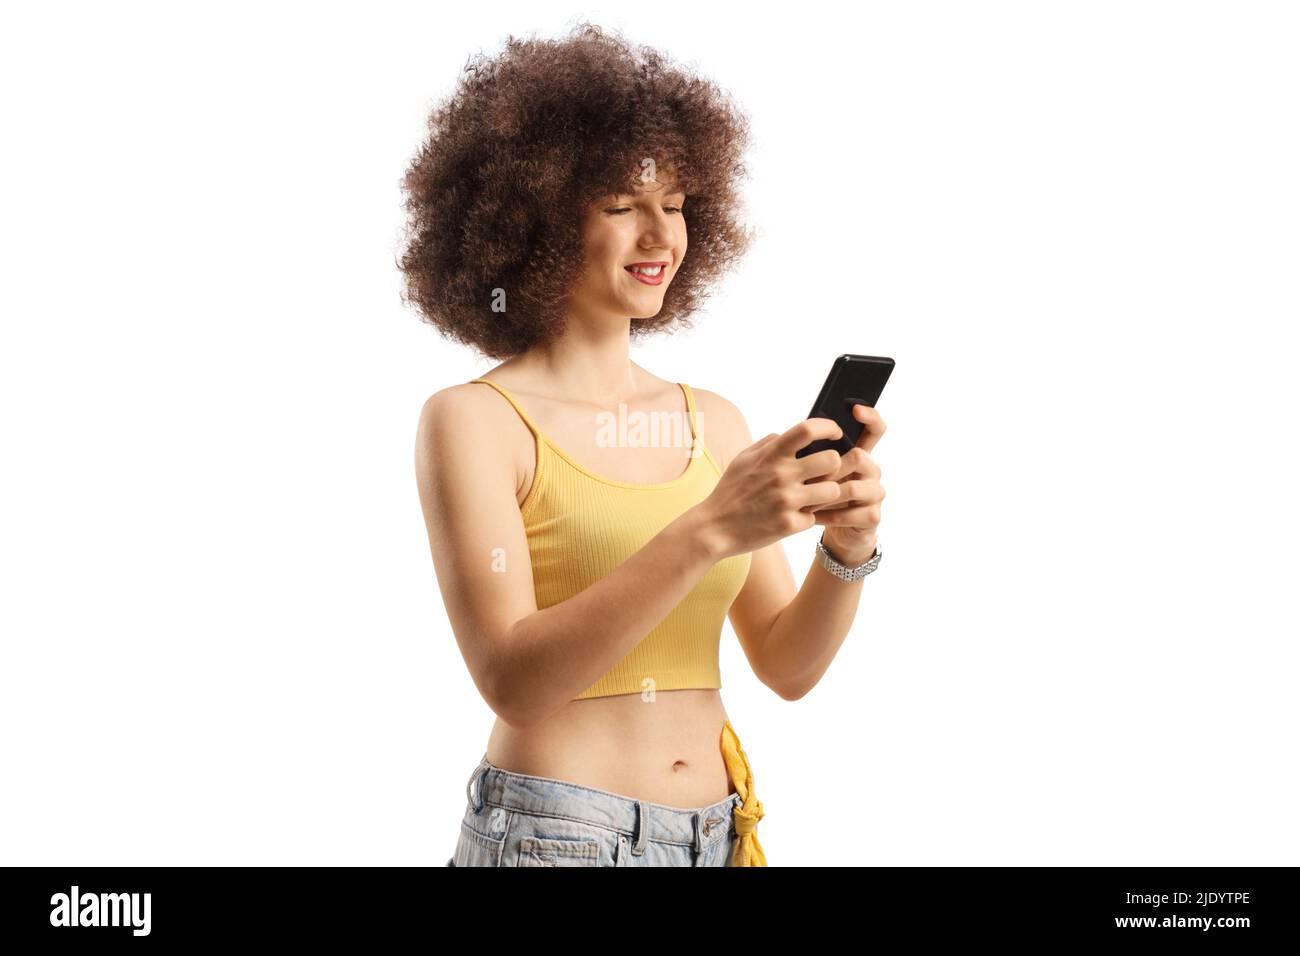 Young caucasian woman with afro hairstyle using a smartphone and smiling isolated on white background Stock Photo